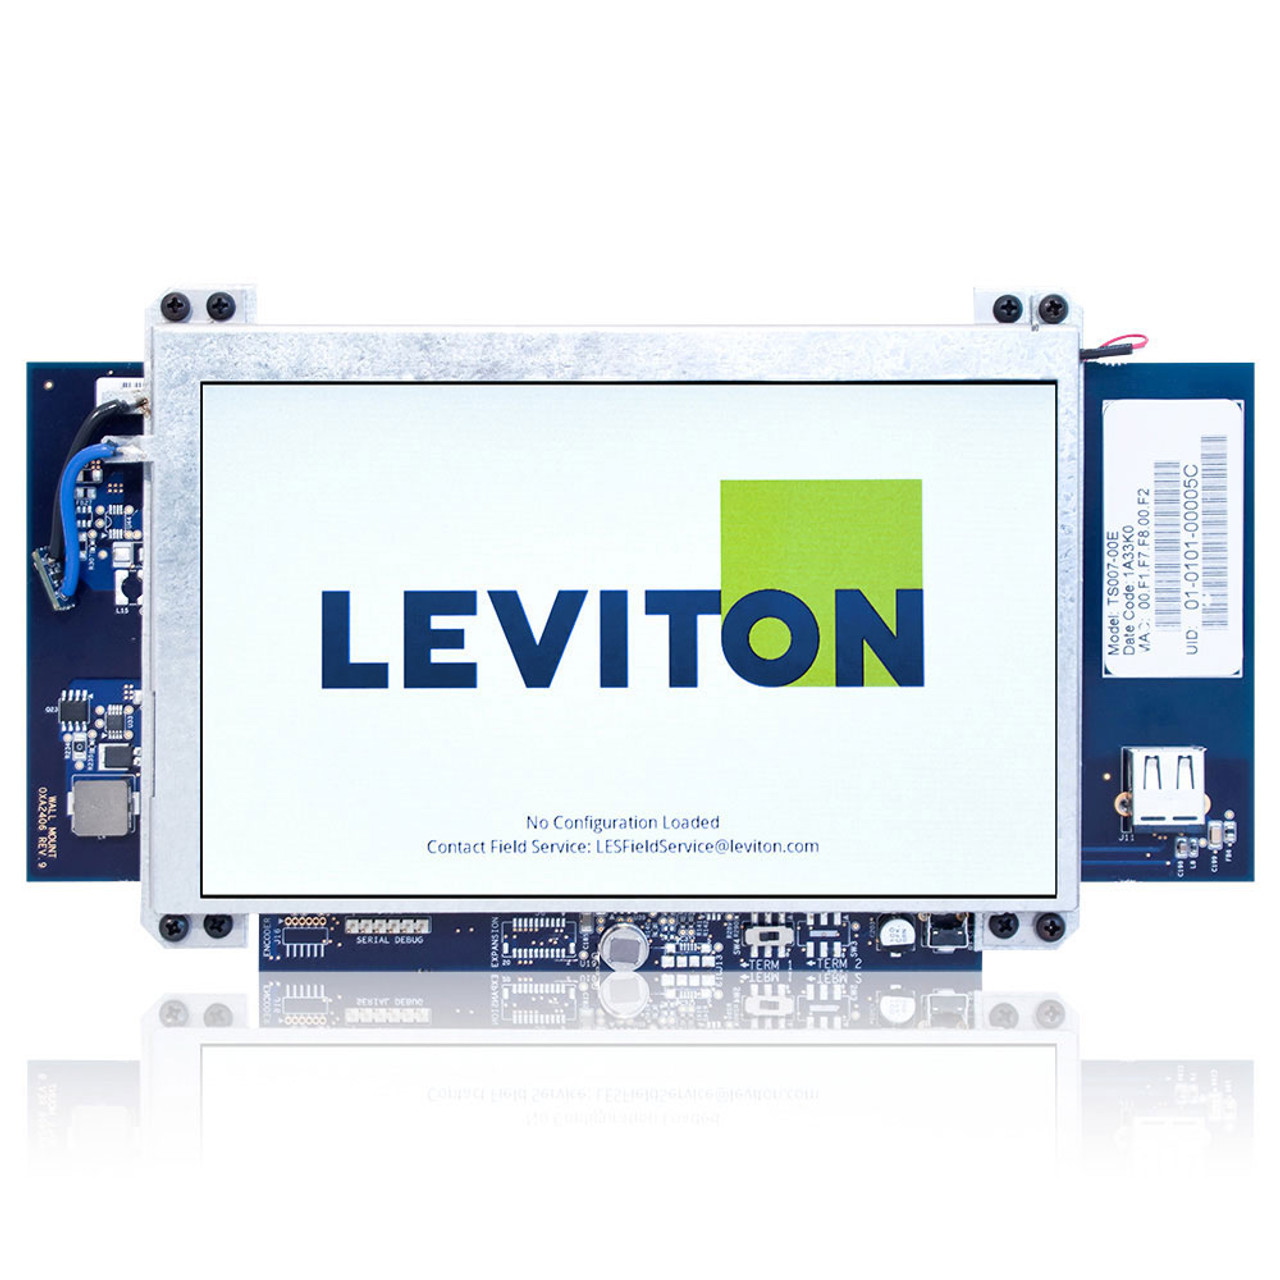 Leviton TS007 Sapphire, Touch Screen, Dimmer Switch, Room Controller, LED Controller, Lighting Control